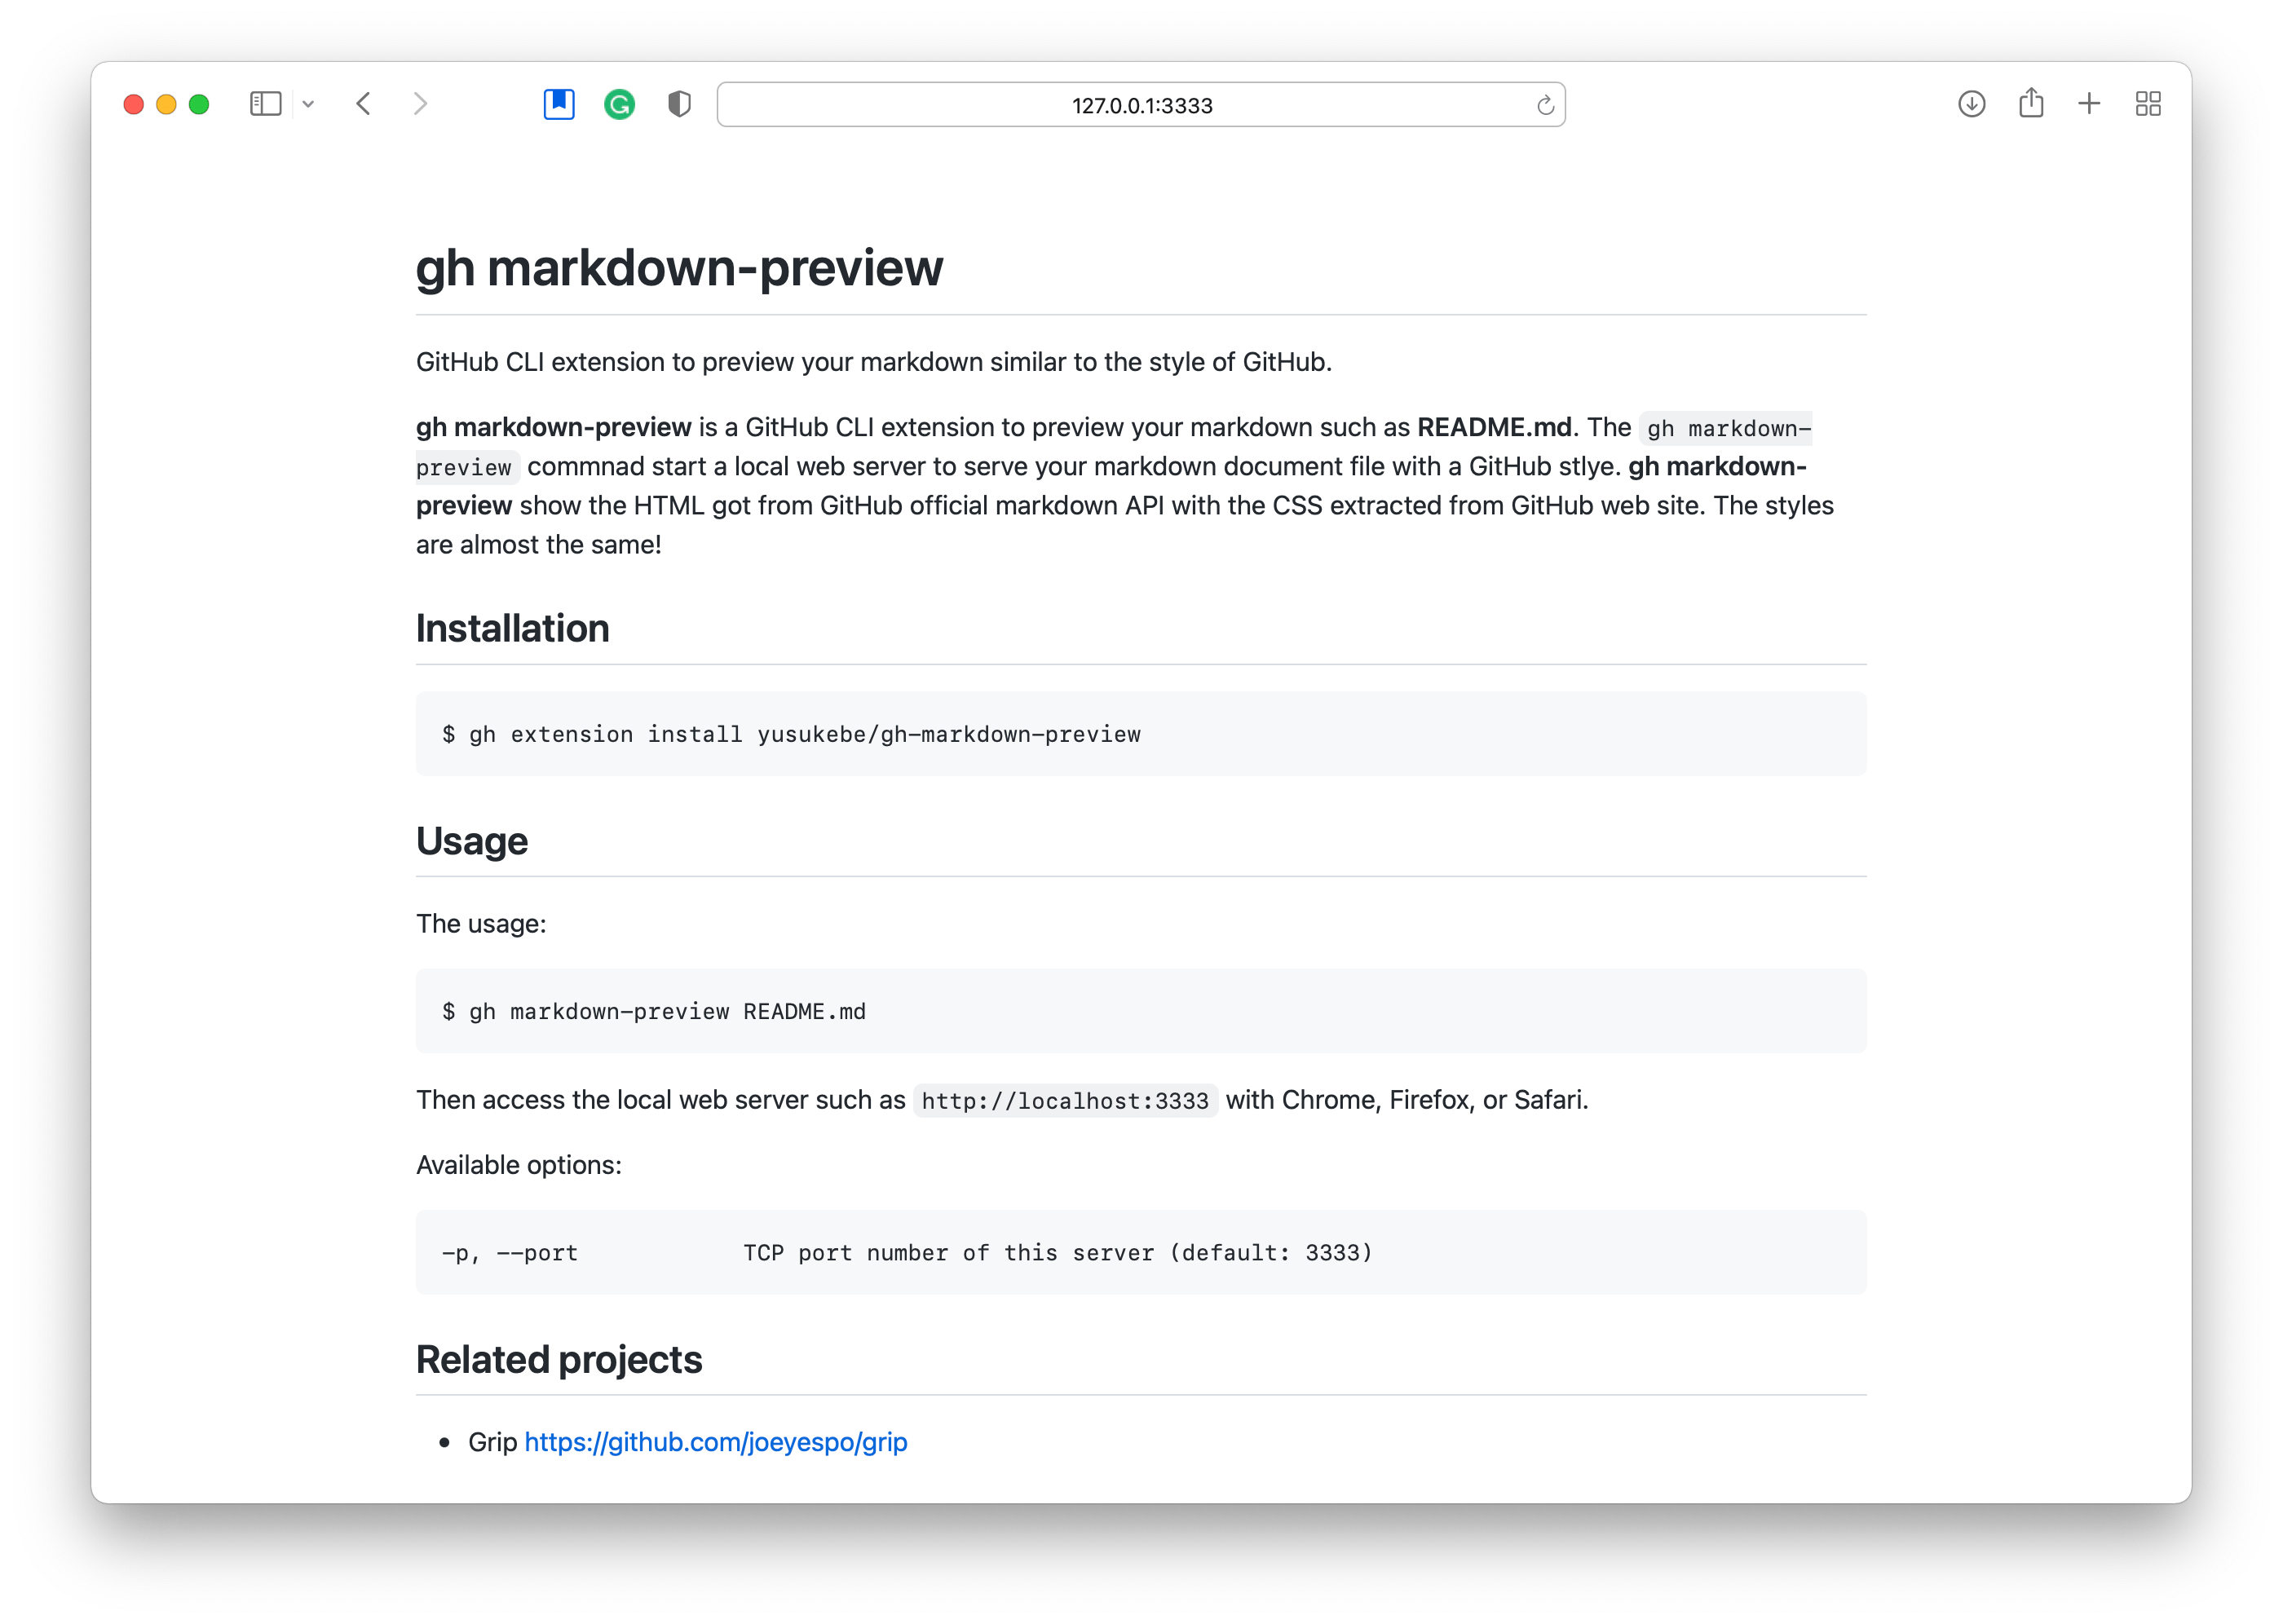 Screenshot of gh markdown-preview